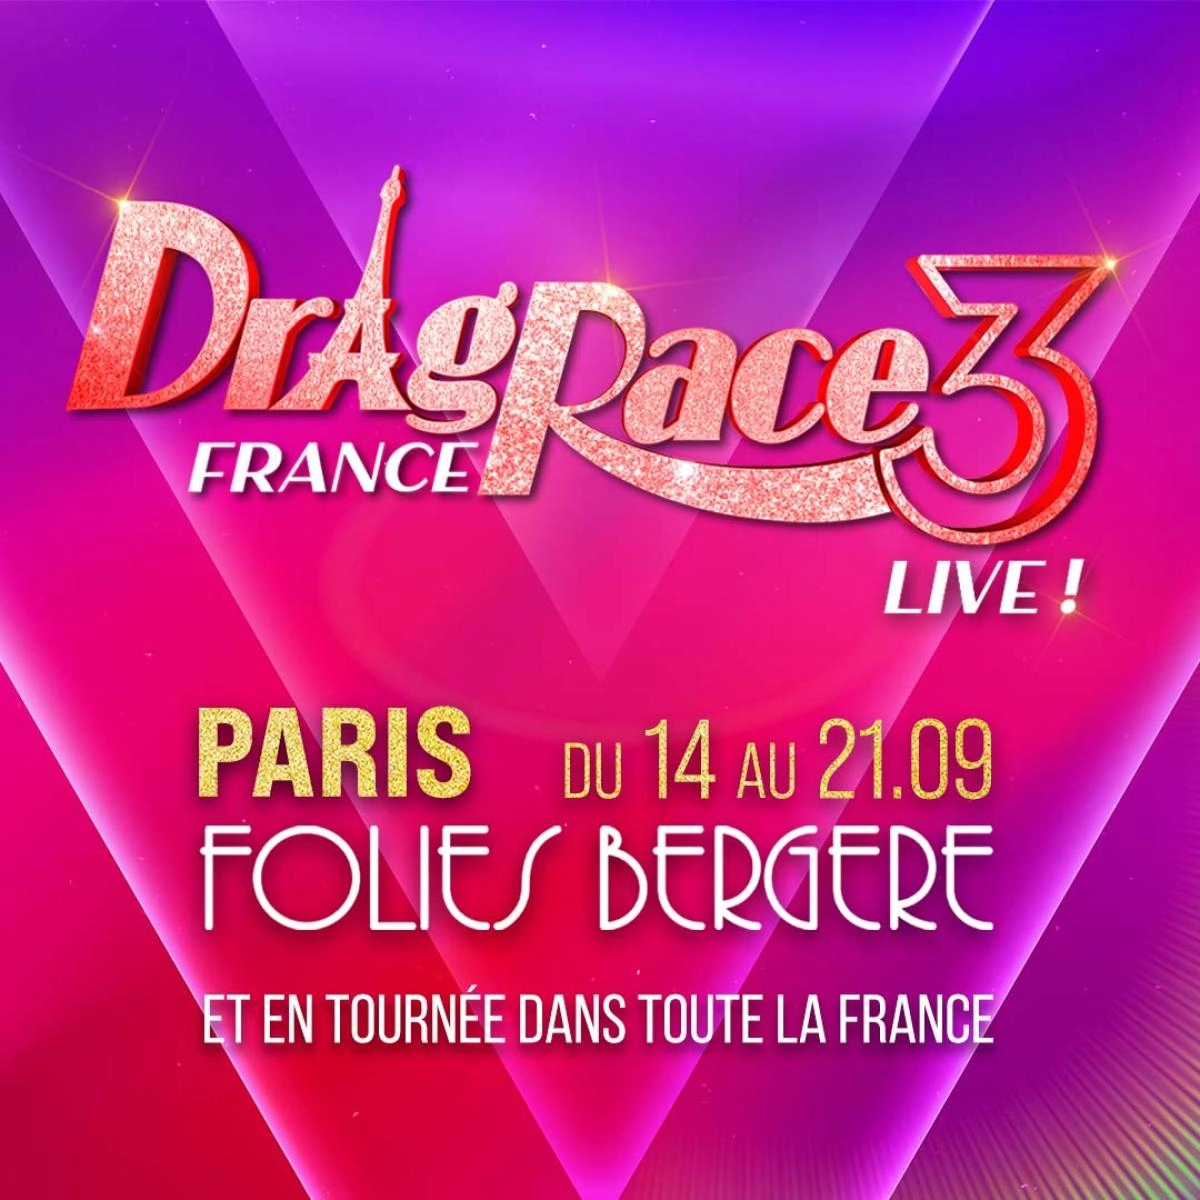 Drag Race France at Folies Bergere Tickets